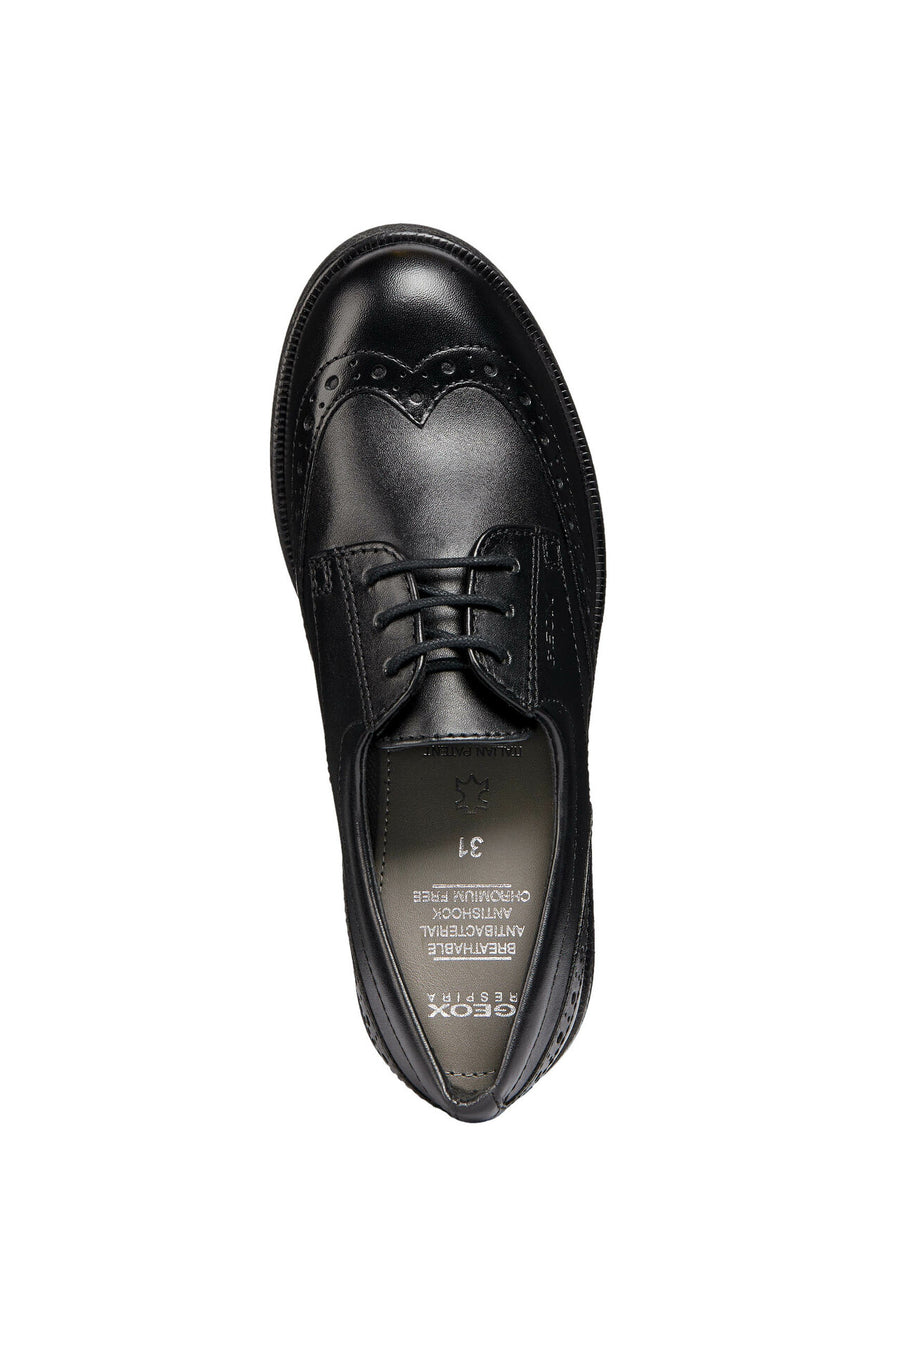 Geox Agata D Lace Up | Black Leather